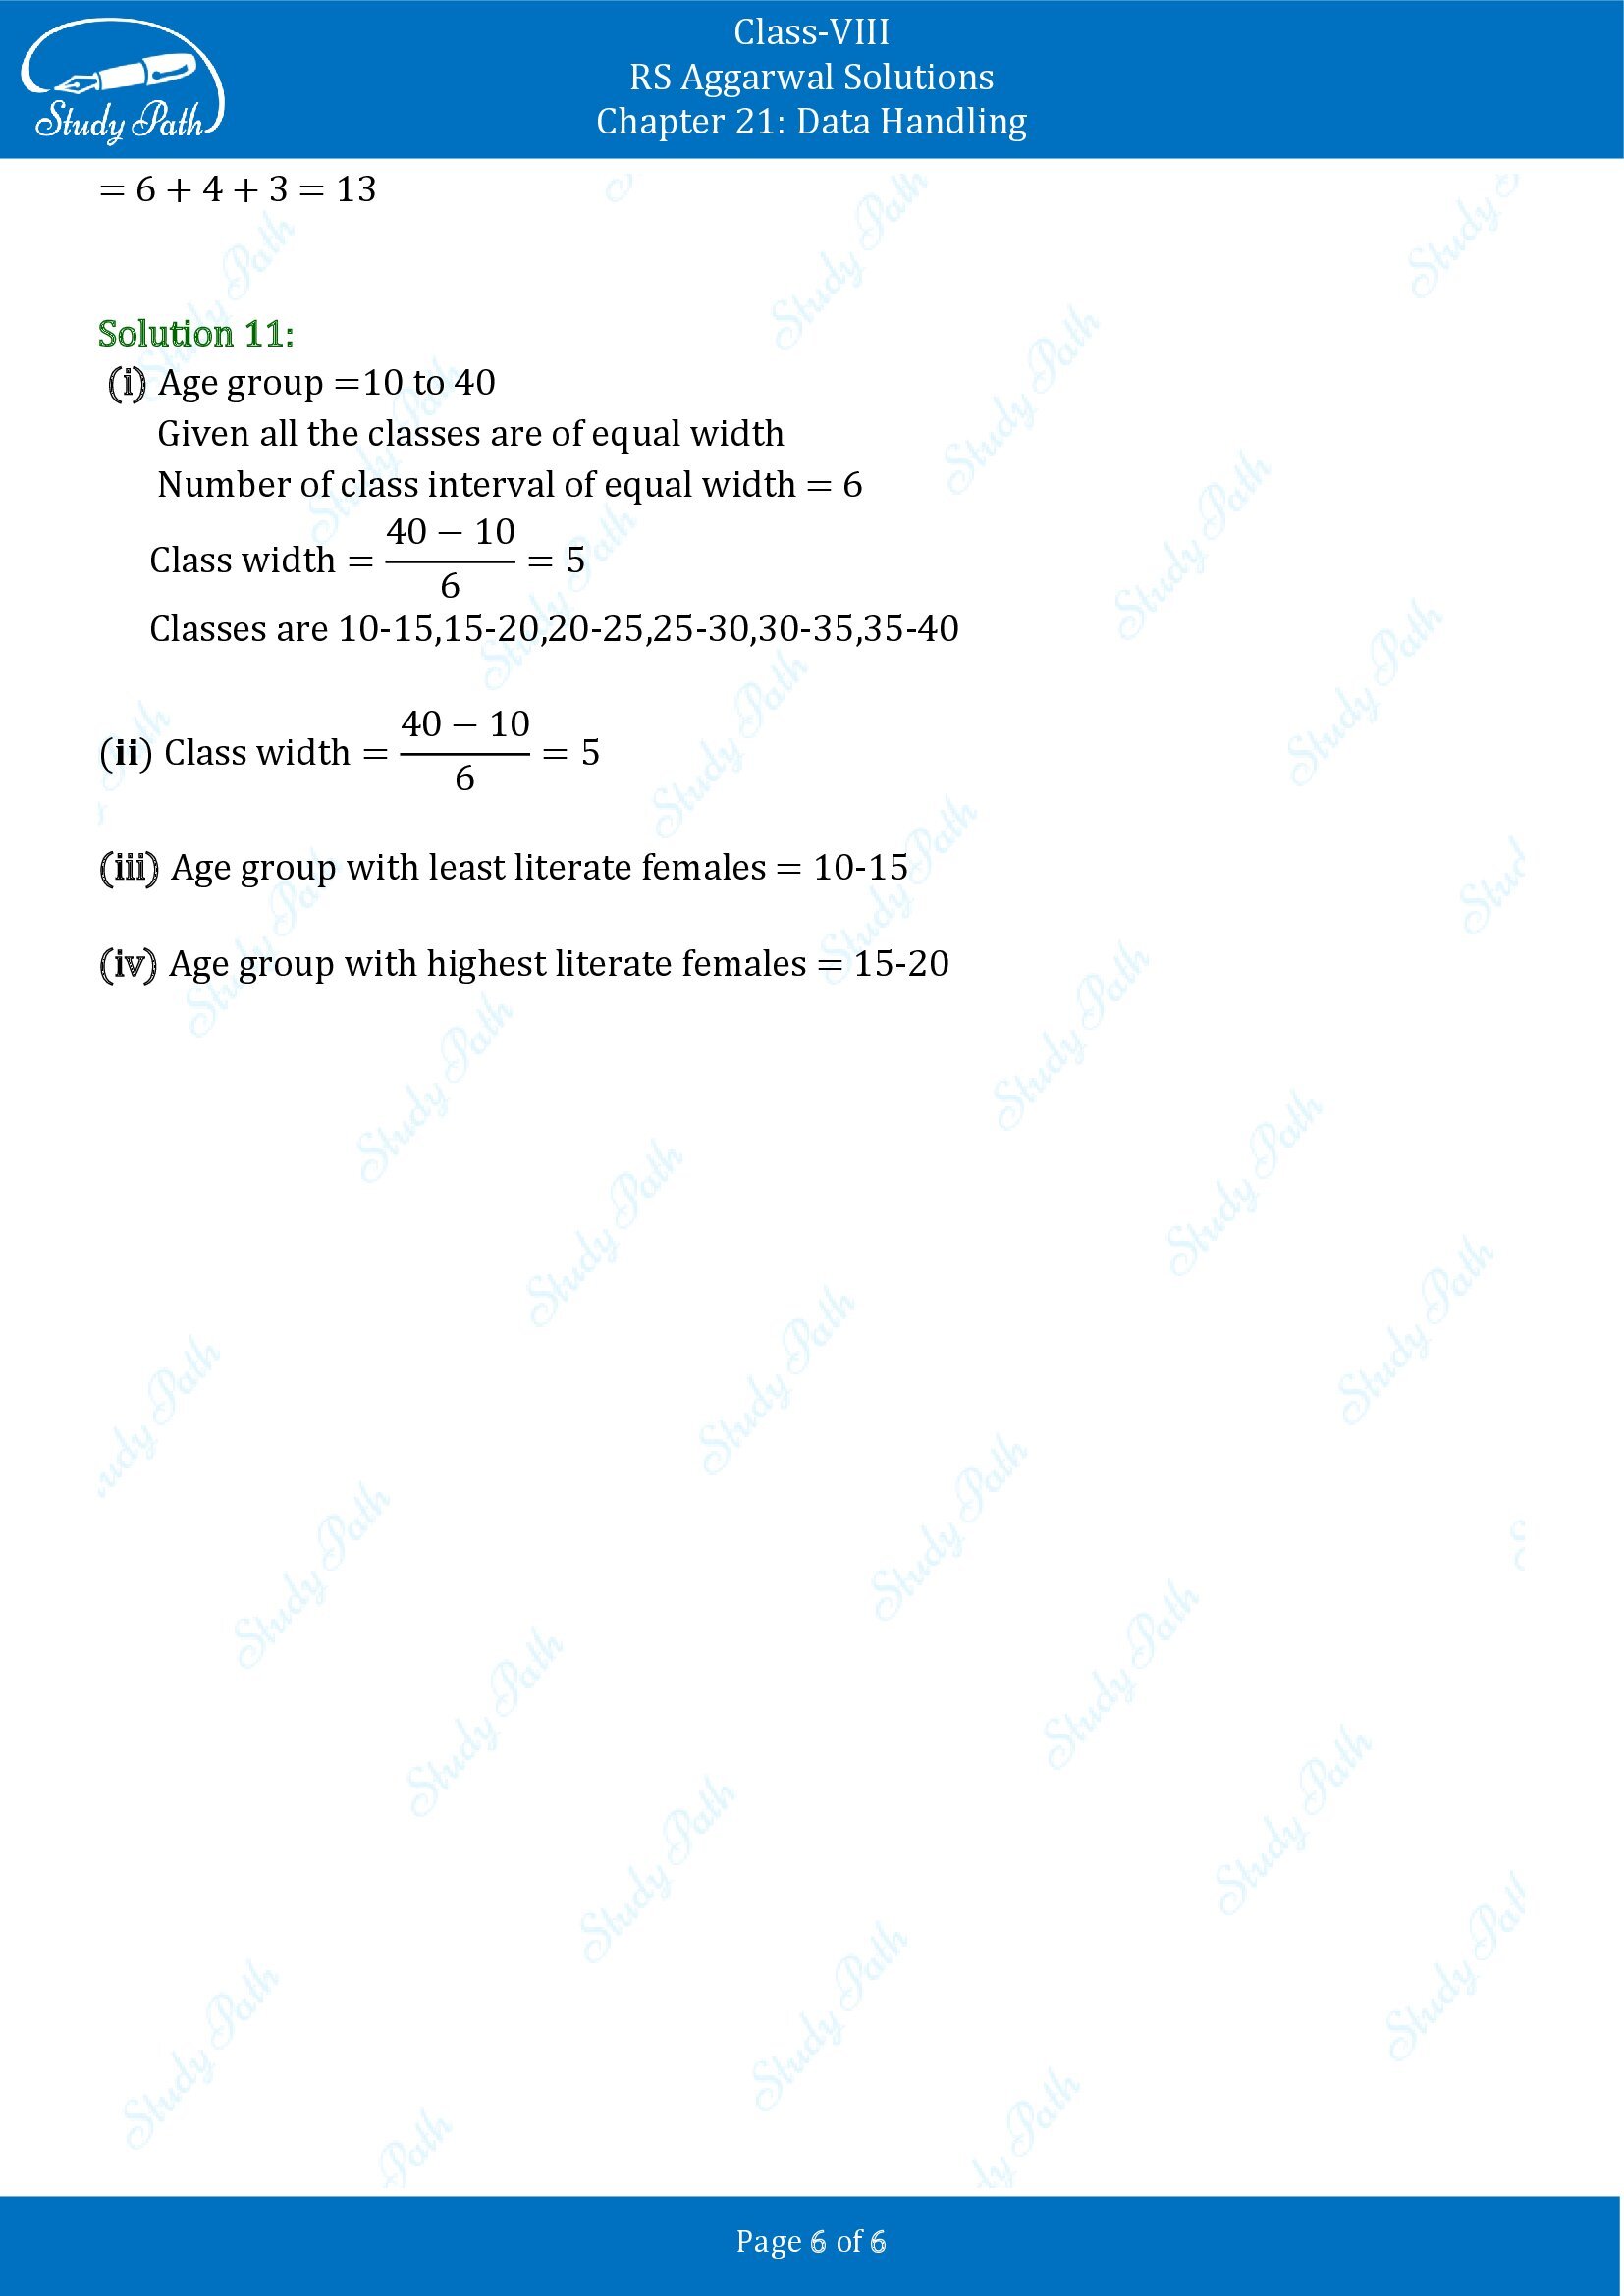 RS Aggarwal Solutions Class 8 Chapter 21 Data Handling Exercise 21C 006